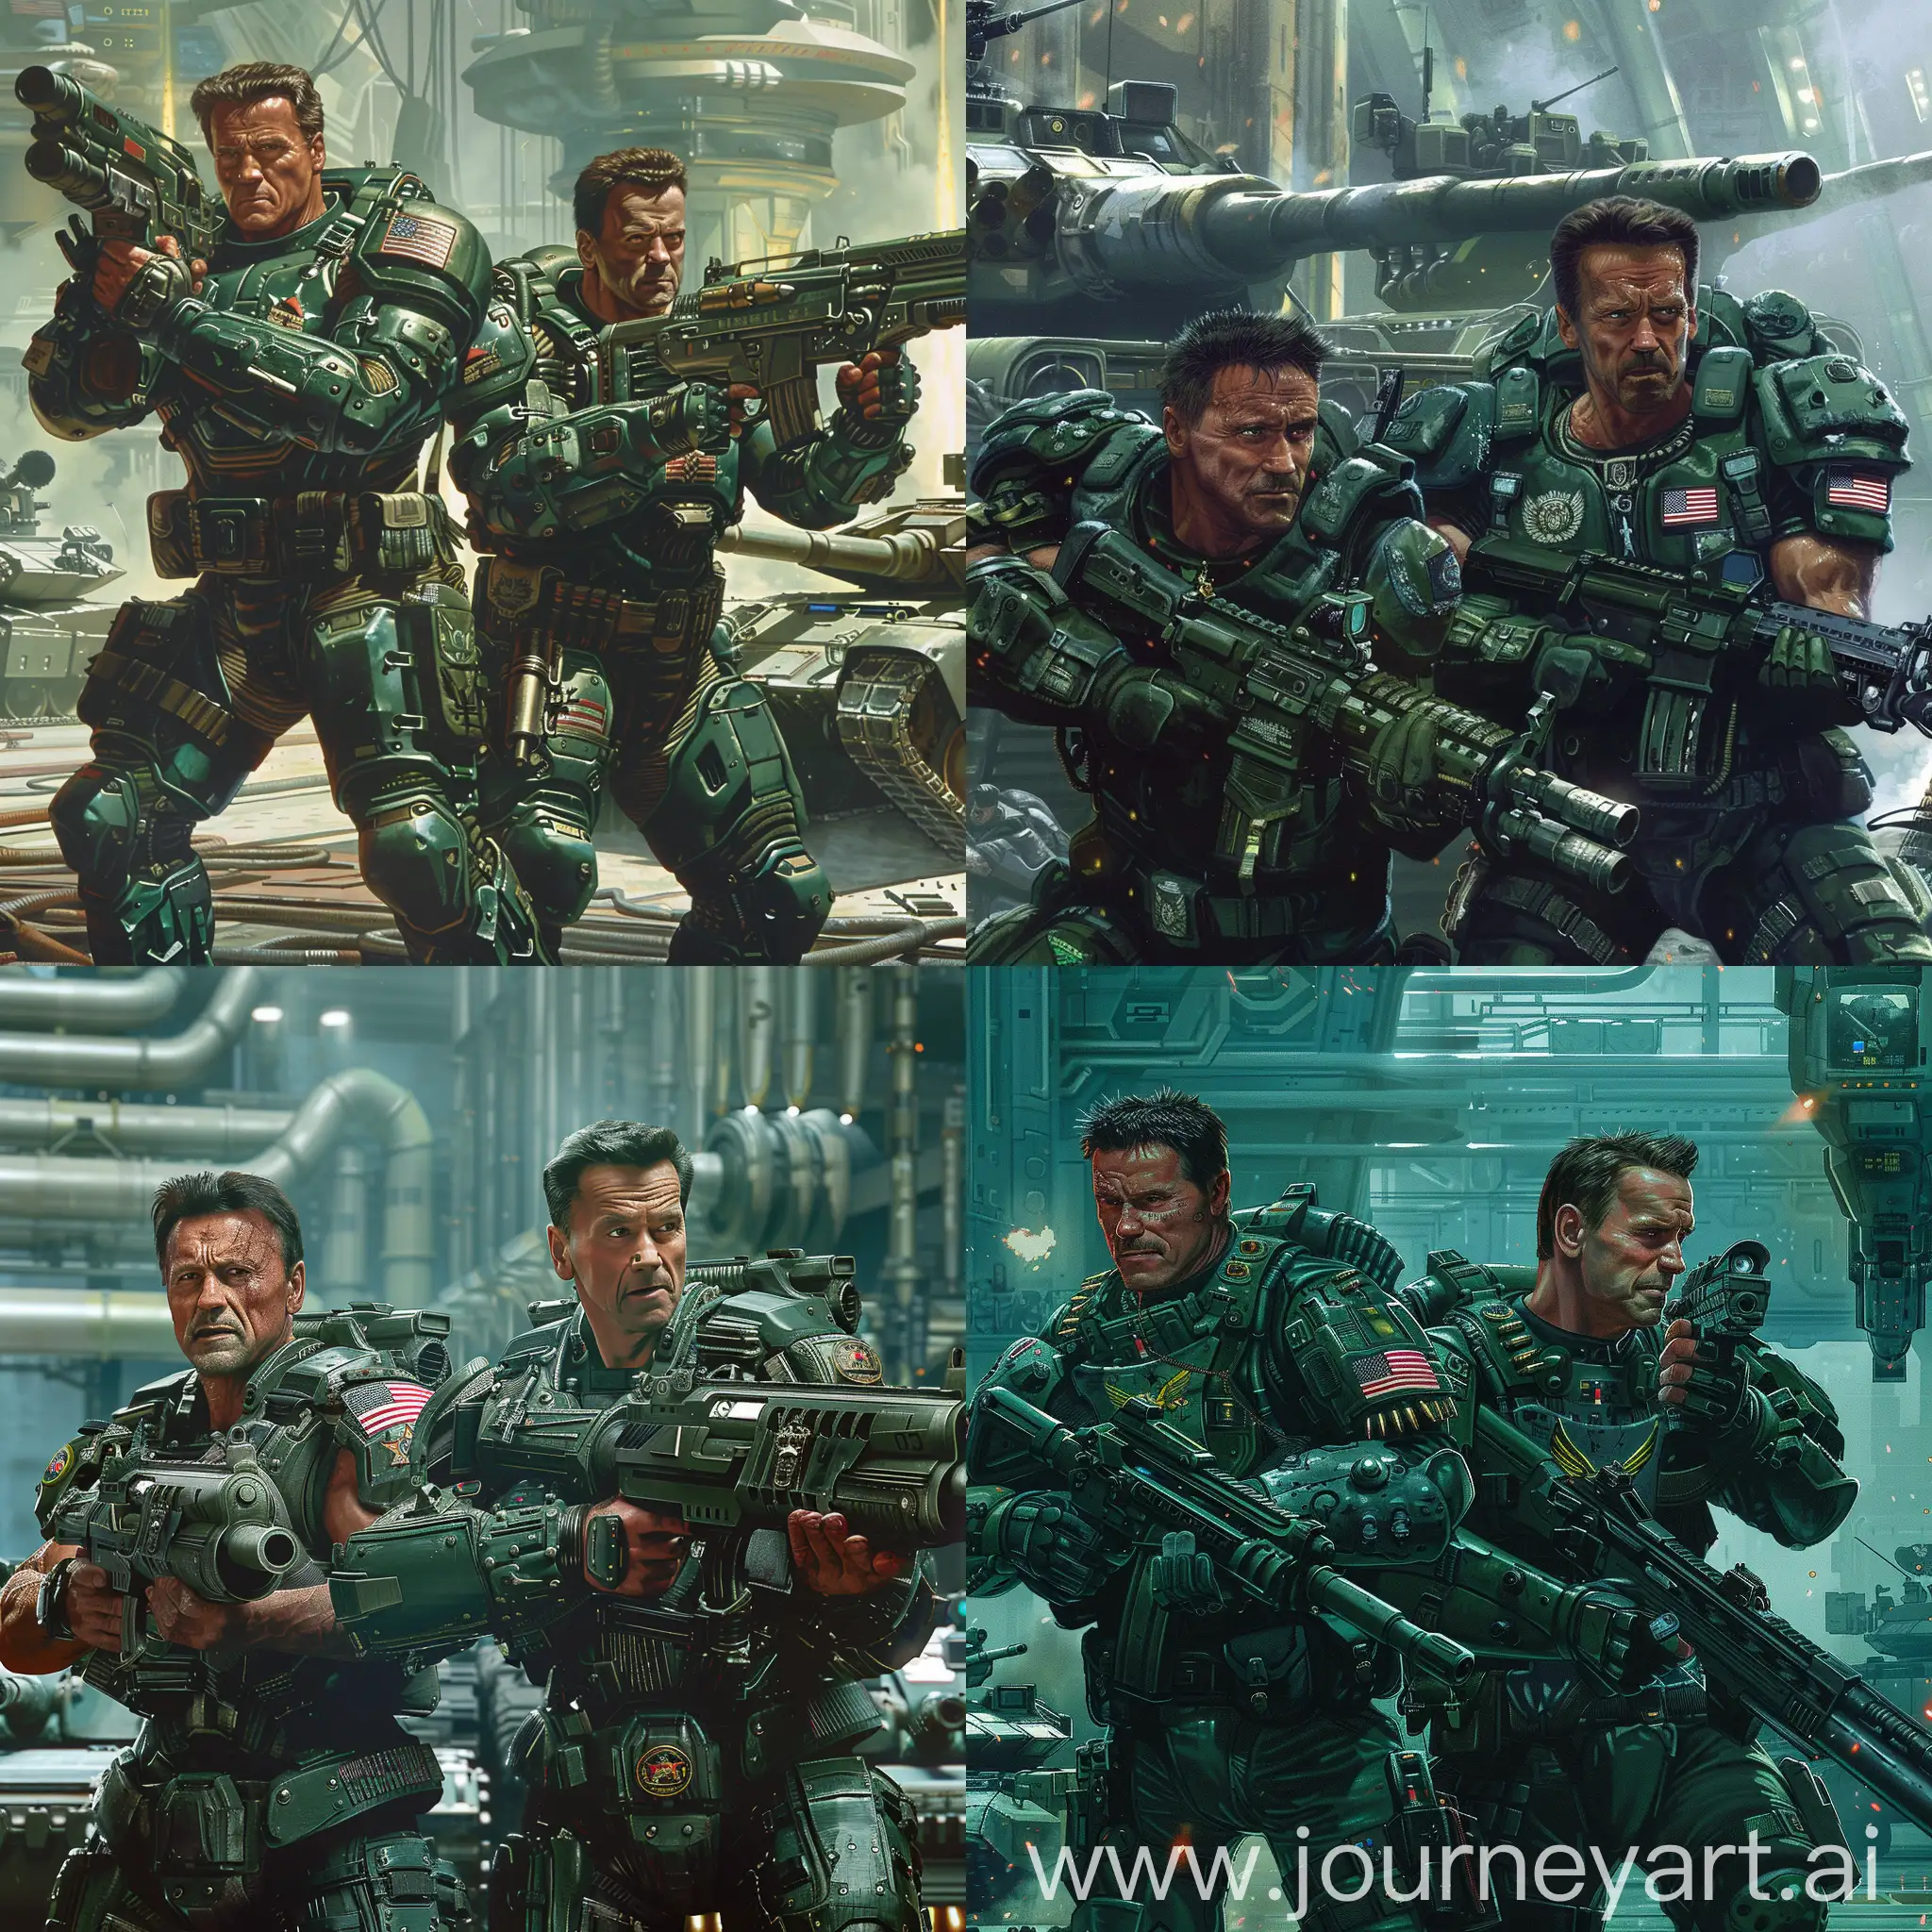 Stallone and Schwarzenegger are both in deep green space marine armors with USA flag emblems,

Stallone has a heavy Machine gun in his hands,

meanwhile, Schwarzenegger has a M202 FLASH rocket launcher in his hands,

they are before a futuristic Cyper Punk US military base,

some futuristic steel tanks are next to them,